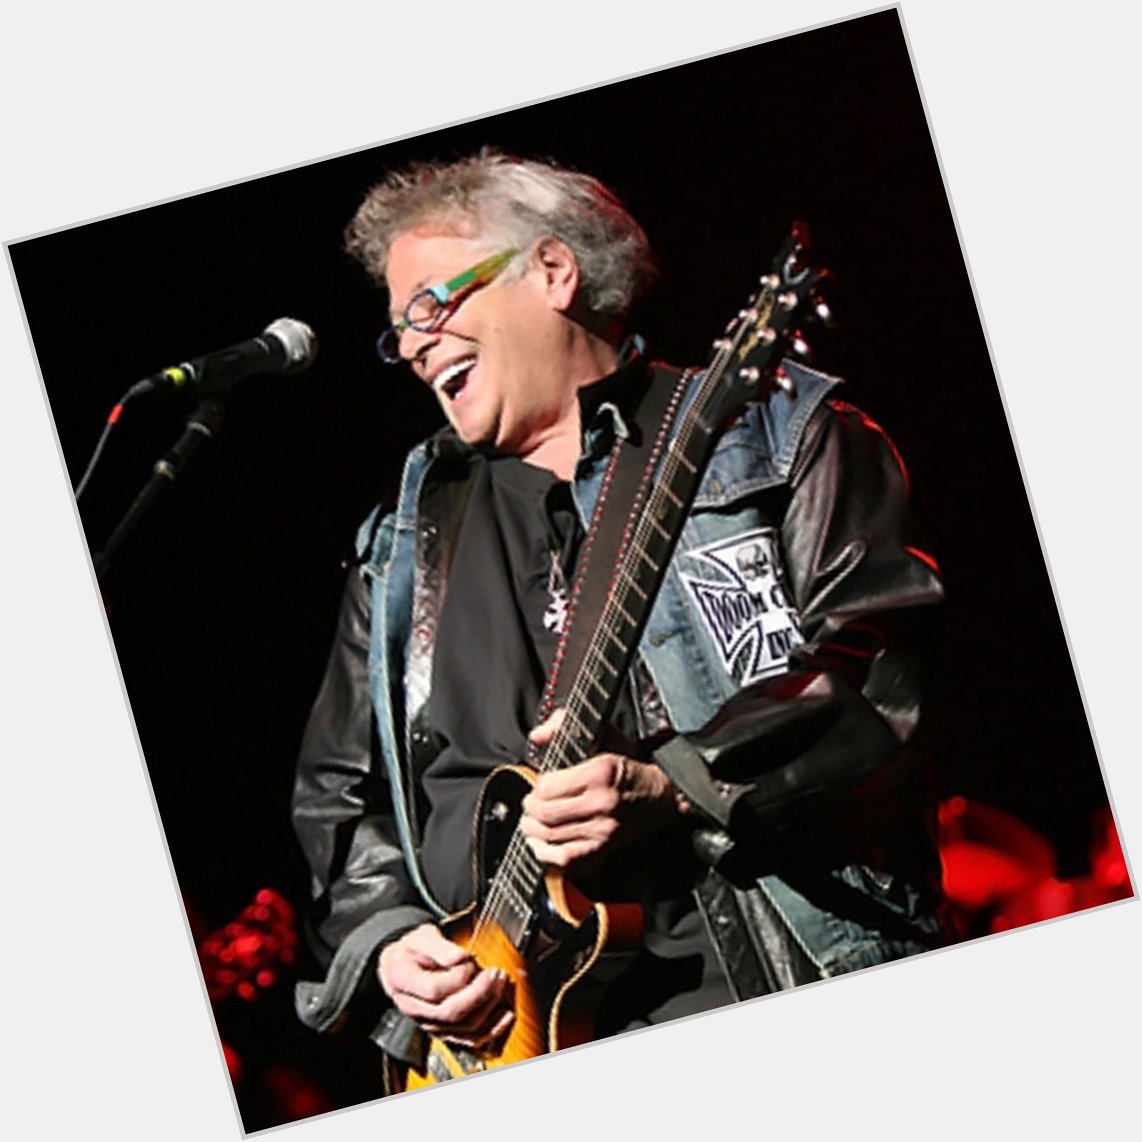 Happy Birthday to Leslie West from Mountain, born Oct 22nd 1945 